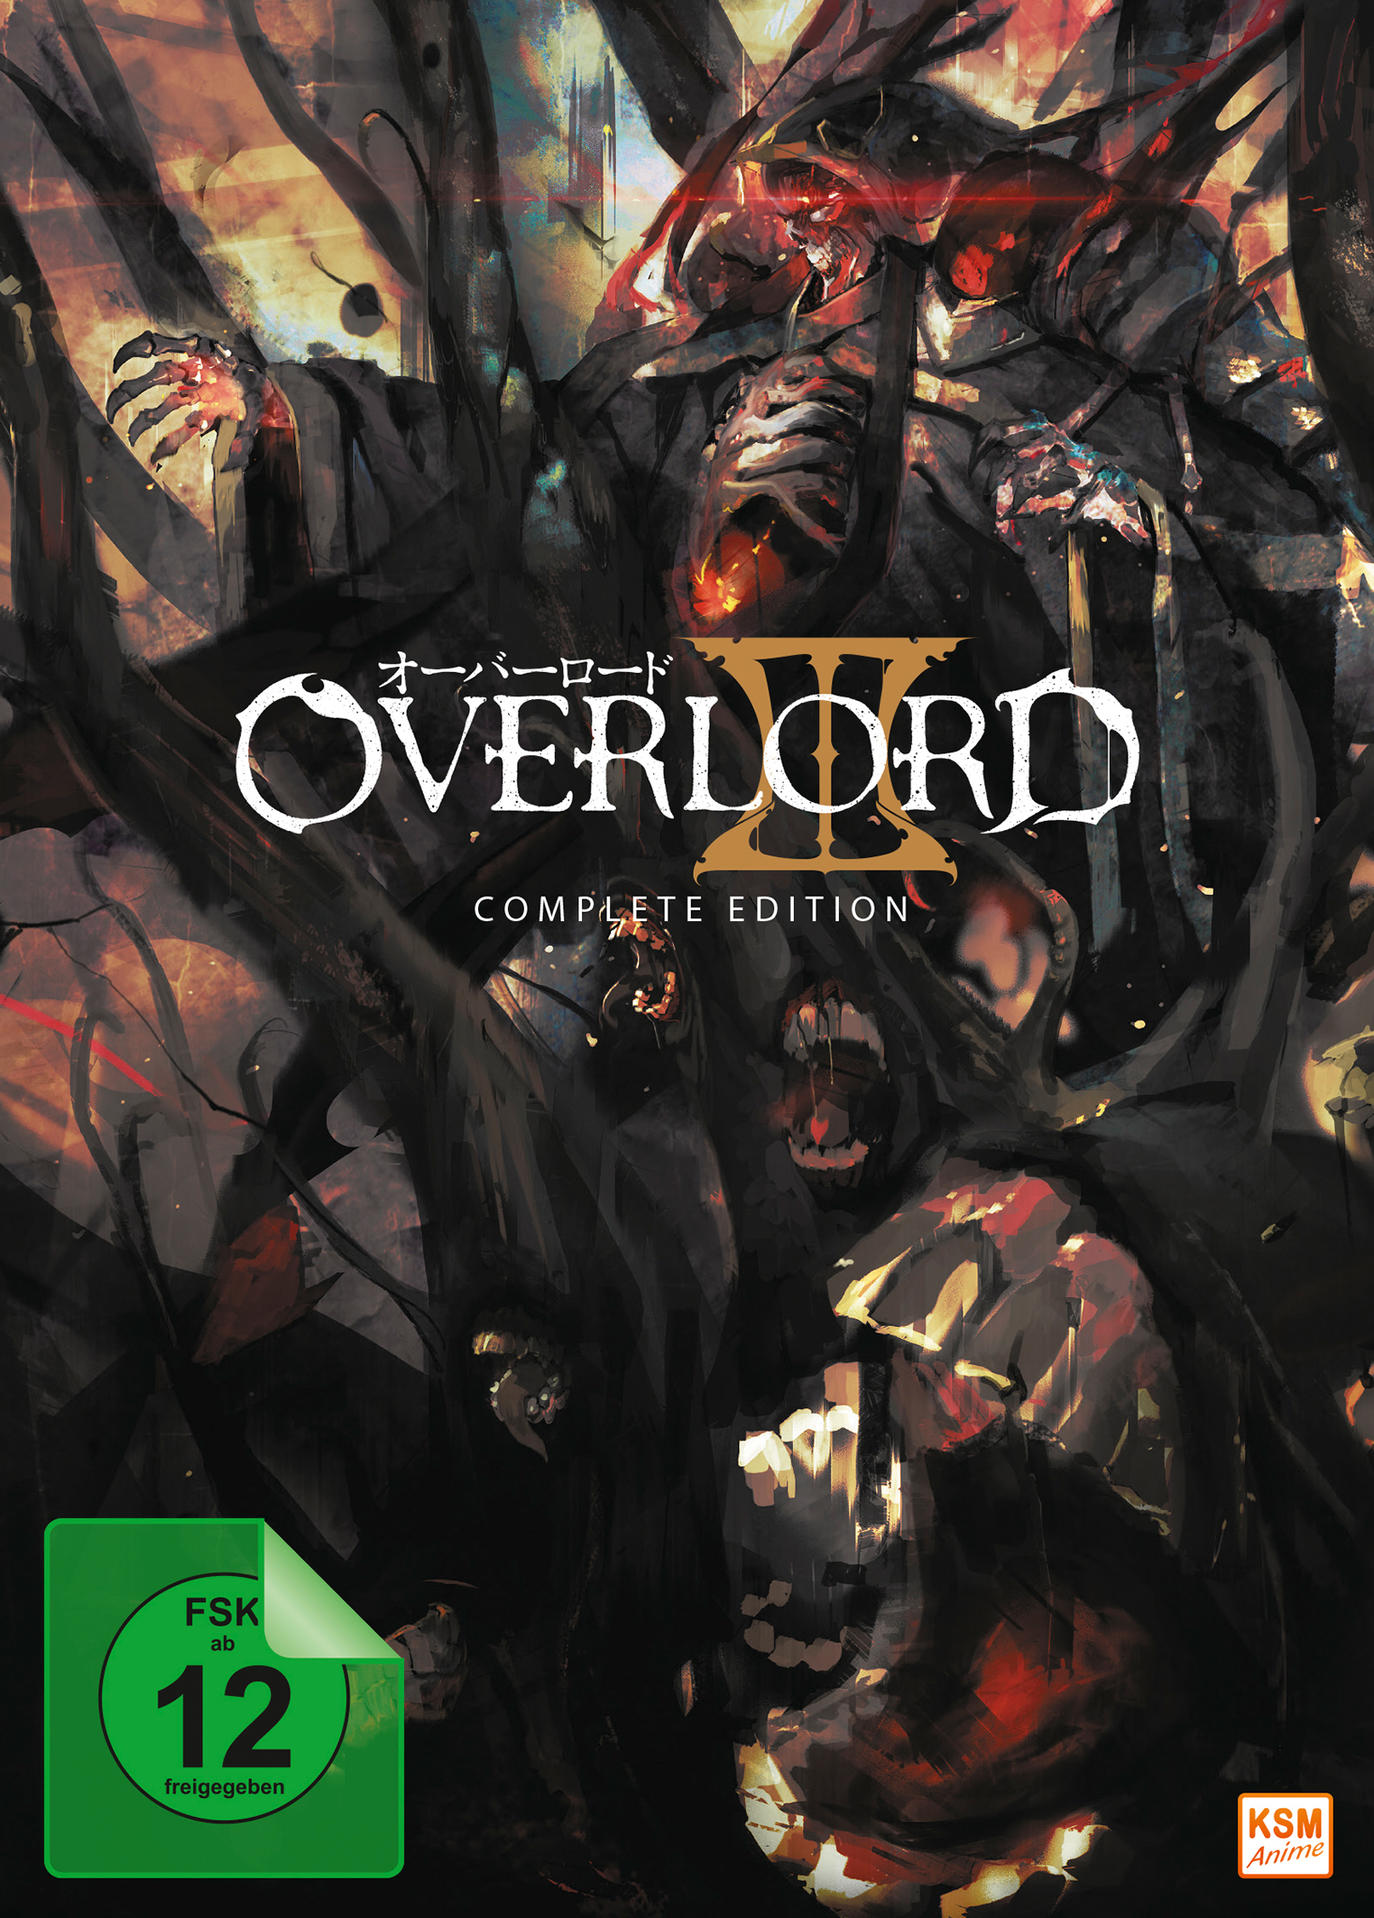 Overlord - Complete 3 - DVD Edition Staffel